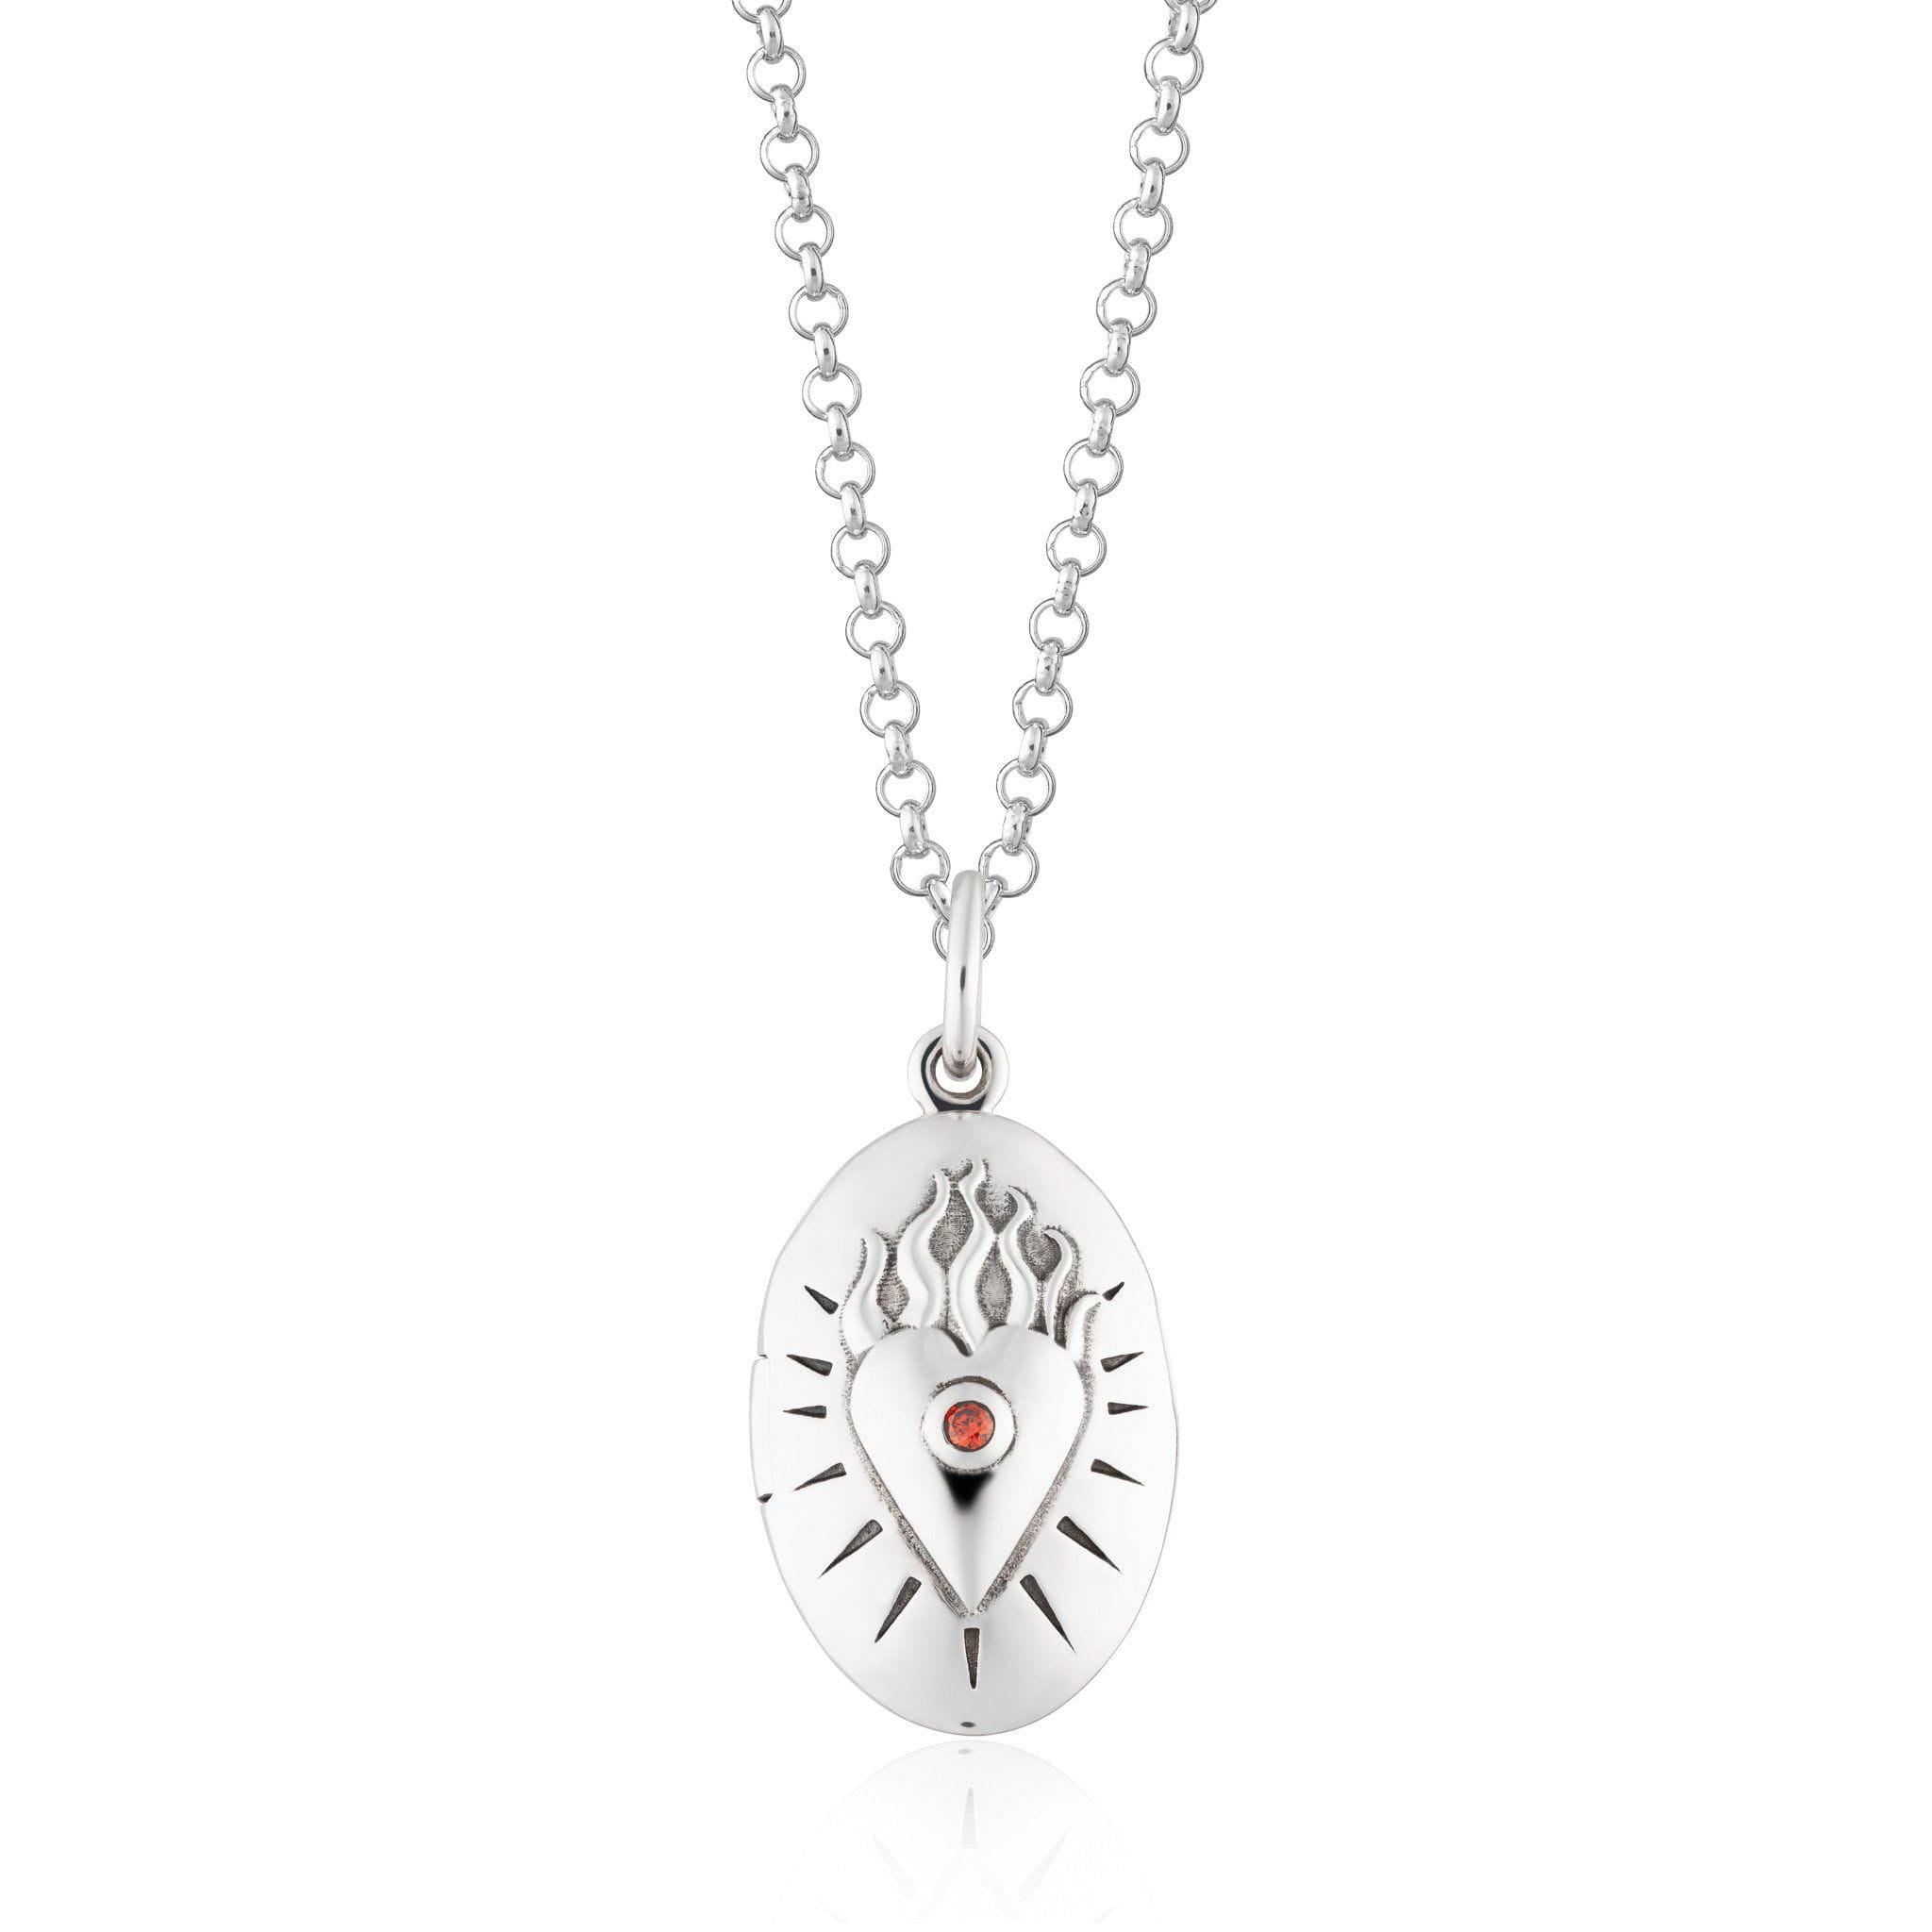 Flaming Heart Locket Necklace  by Scream Pretty